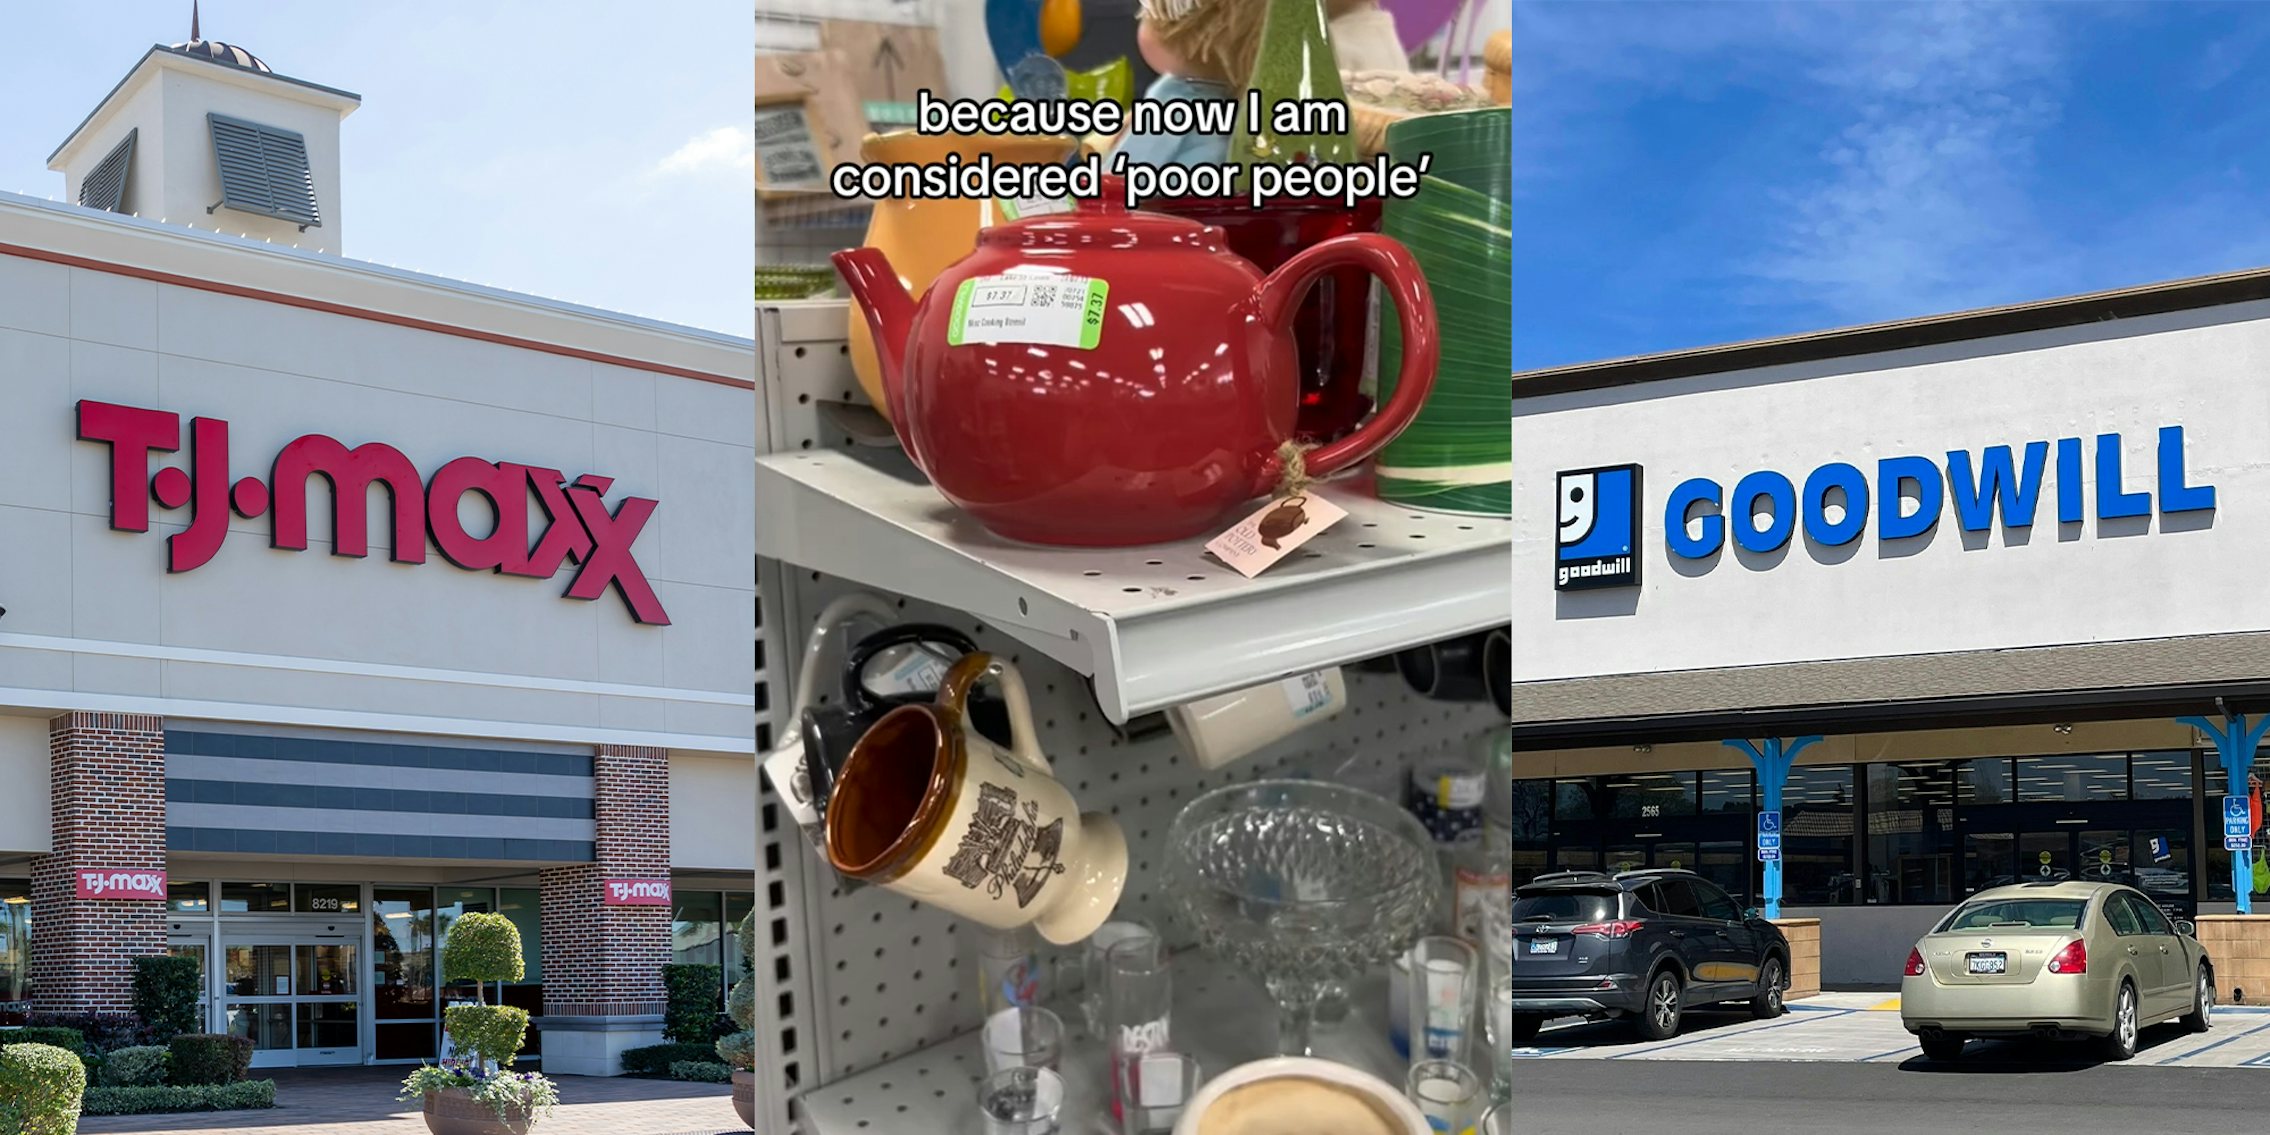 Shopper catches Goodwill selling $6.99 pot from TJ Maxx for $7.37